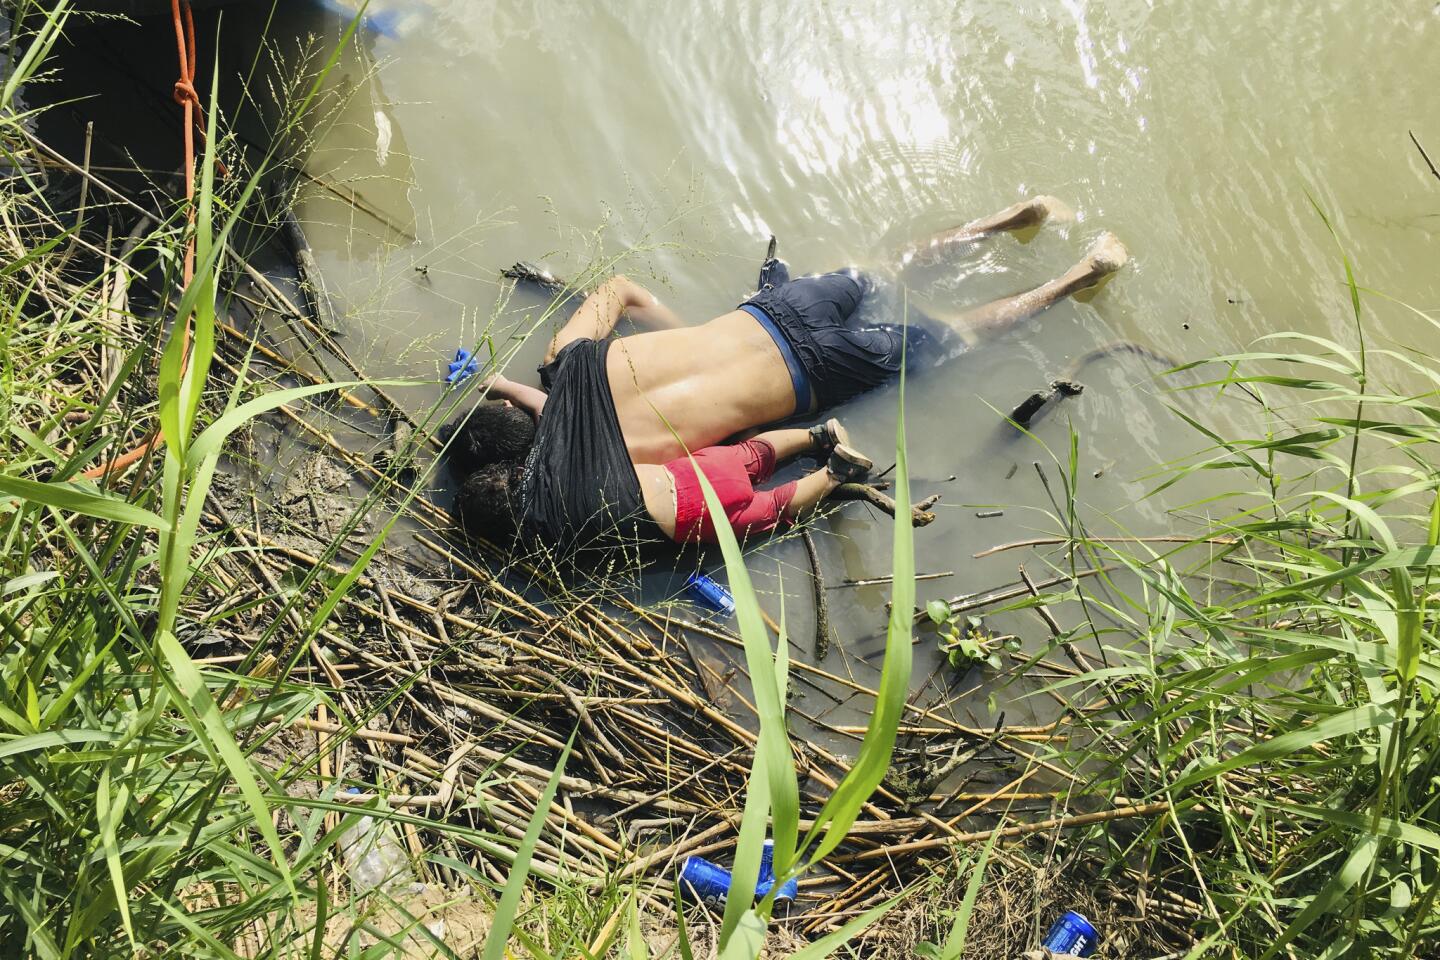 The bodies of Salvadoran migrant Oscar Alberto Martinez Ramirez and his nearly 2-year-old daughter Valeria lie on the bank of the Rio Grande on June 24, 2019, in Matamoros, Mexico, after they drowned trying to cross the river to Brownsville, Texas. According to reports, Martinez had gone back into the river to get his wife after he had safely gotten their young daughter across the river. Valeria followed her father back in the river and as he tried to retrieve his daughter, they were both swept away. Martinez' wife, Tania told Mexican authorities she watched her husband and child disappear in the strong current.